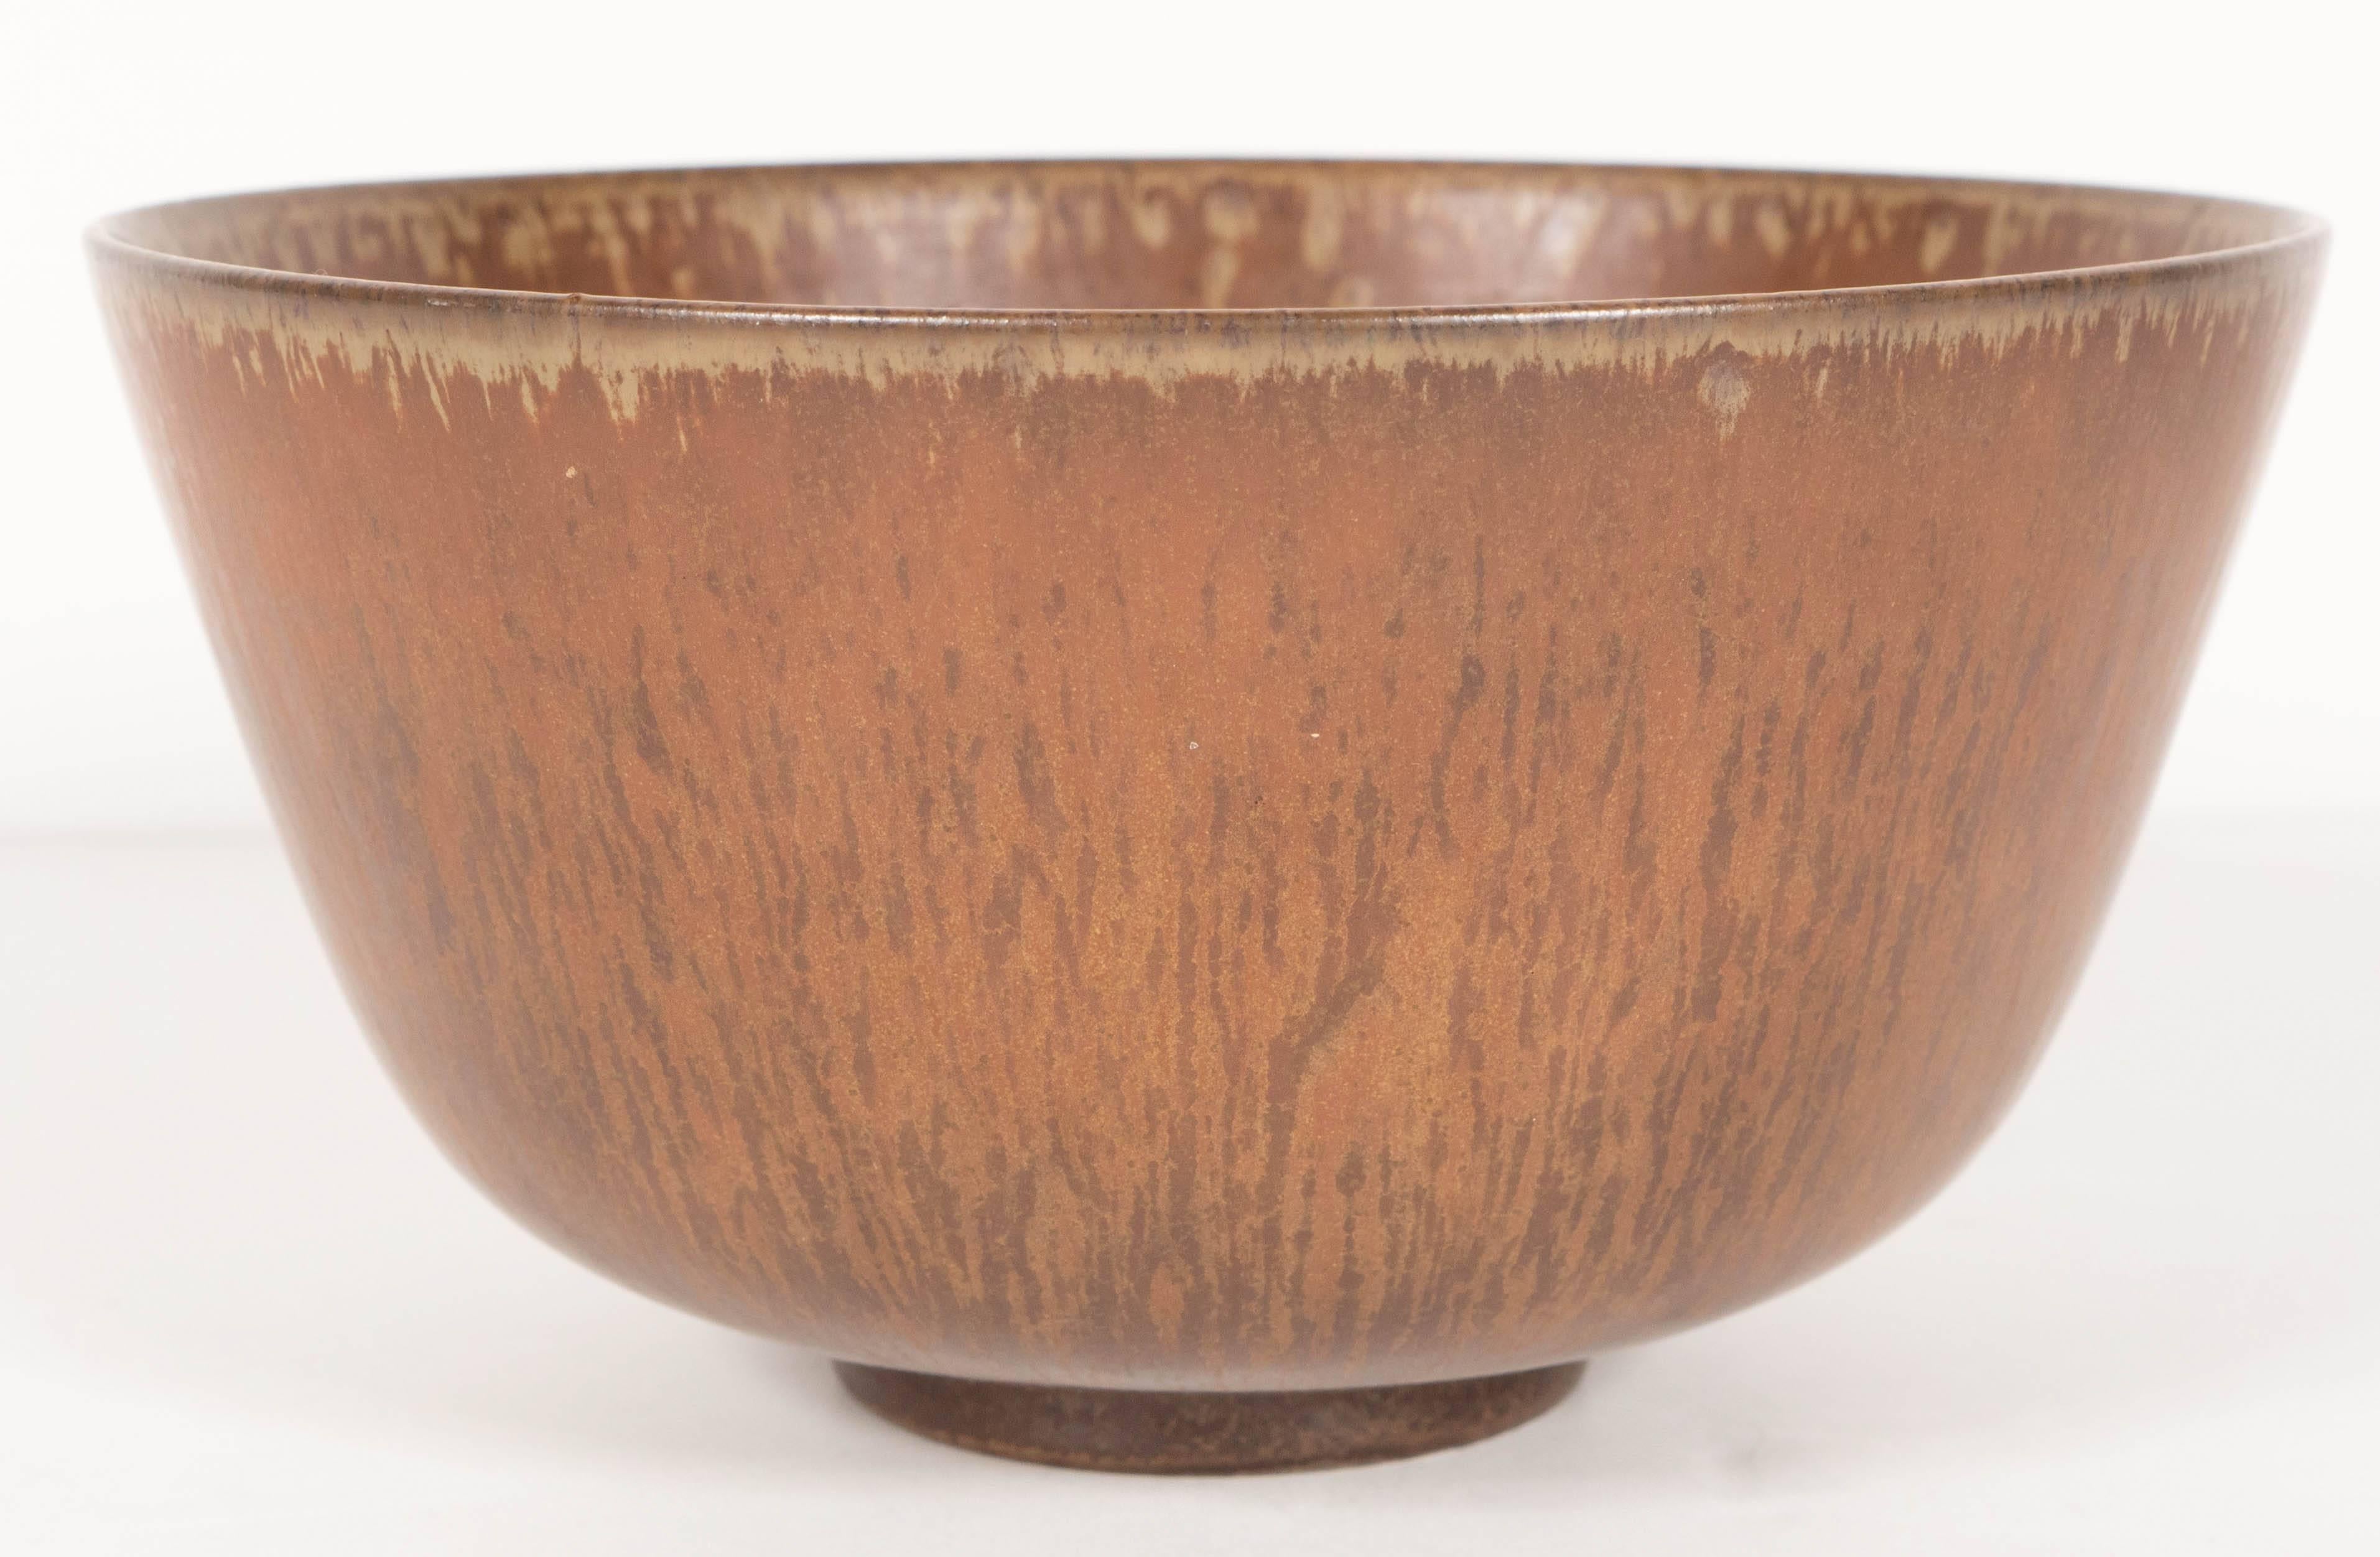 A handsome Mid-Century Modernist ceramic bowl by Gunnar Nylund for Rörstrand. An abstract pattern with hues of brown and matted finish give this piece a very organic feel. Signed on its bottom. This piece is in excellent condition.